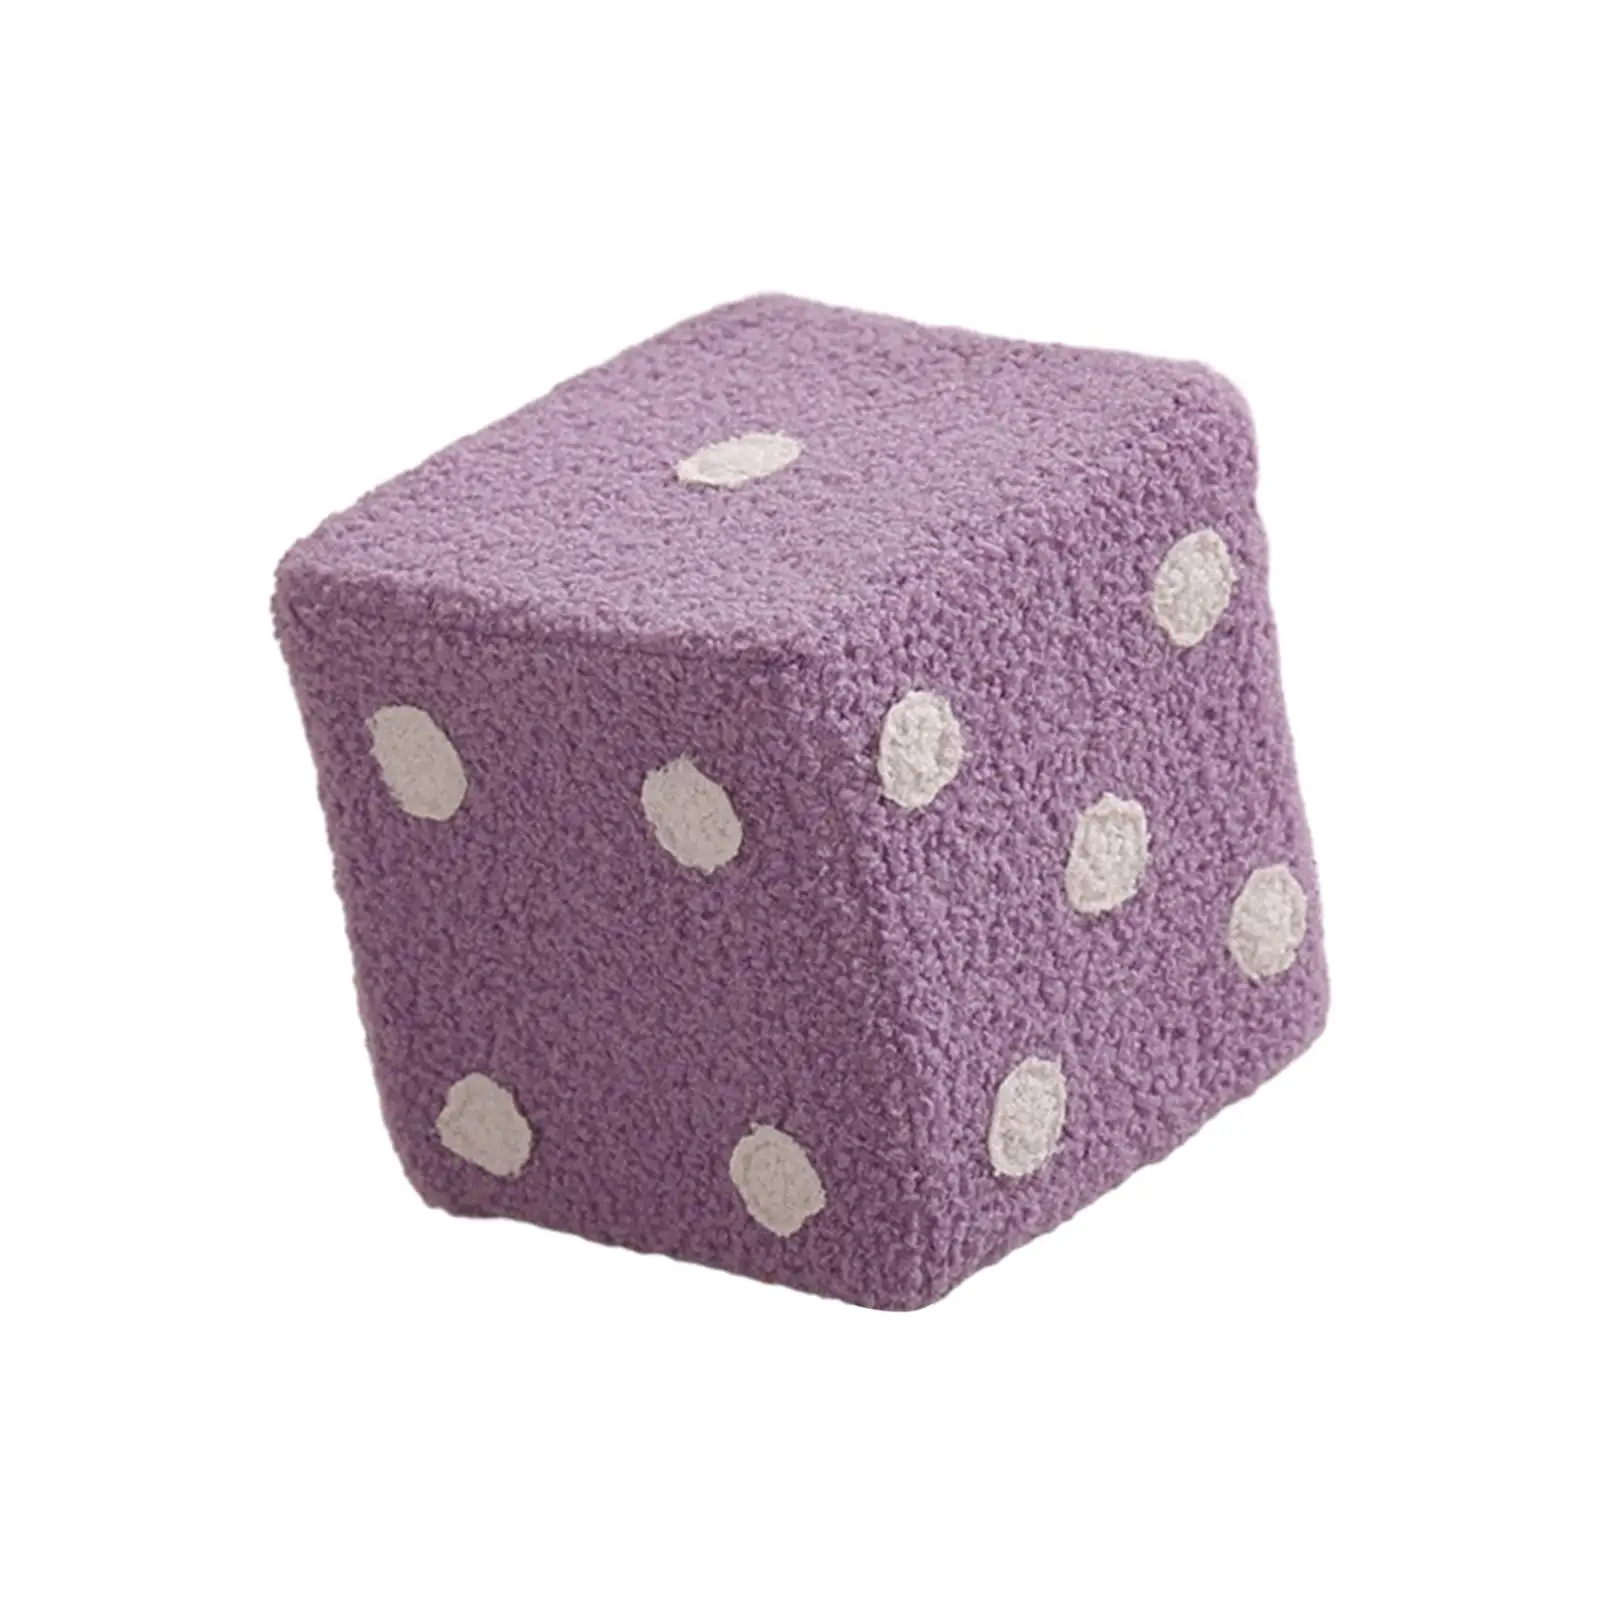 Dice Cubic Foot Stool Non Slip Furniture Shoe Changing Stool Dice Cube Ottoman for Apartment Entryway Dressing Room Home Doorway